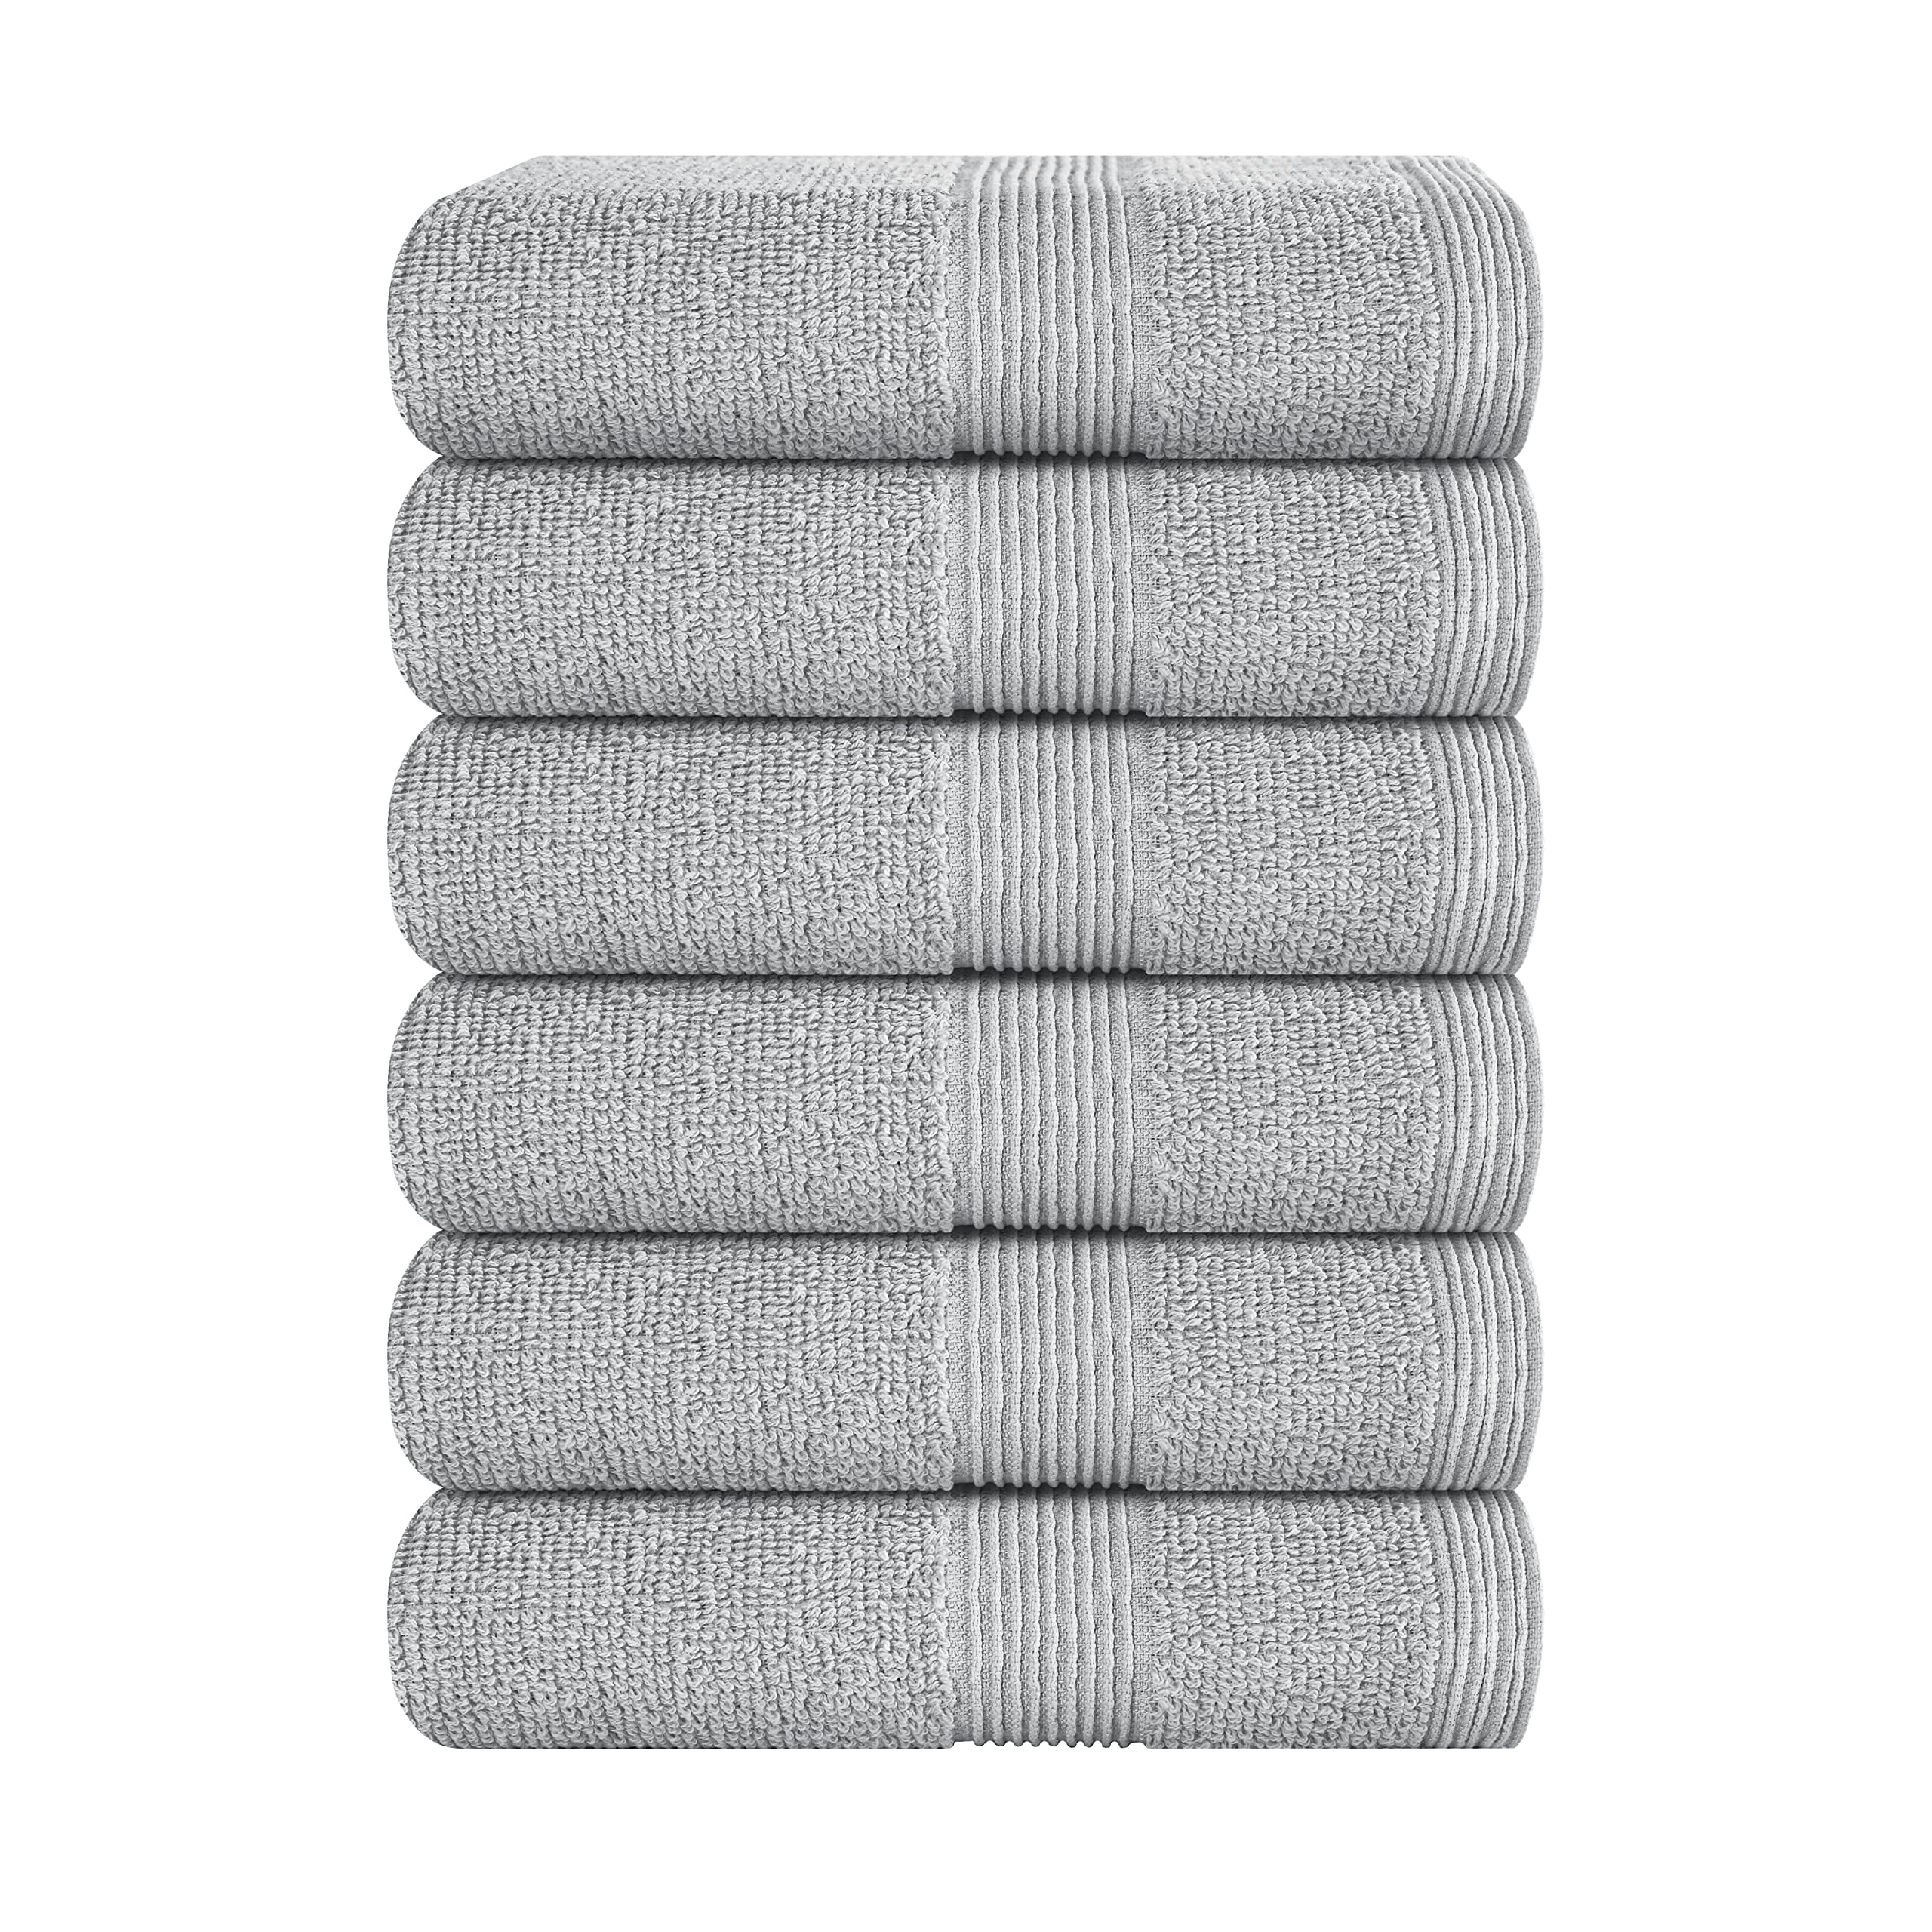 KEEPOZ Kitchen Towels, 15 x 25 Inches, 100% Ring Spun Cotton Super Soft and  Highly